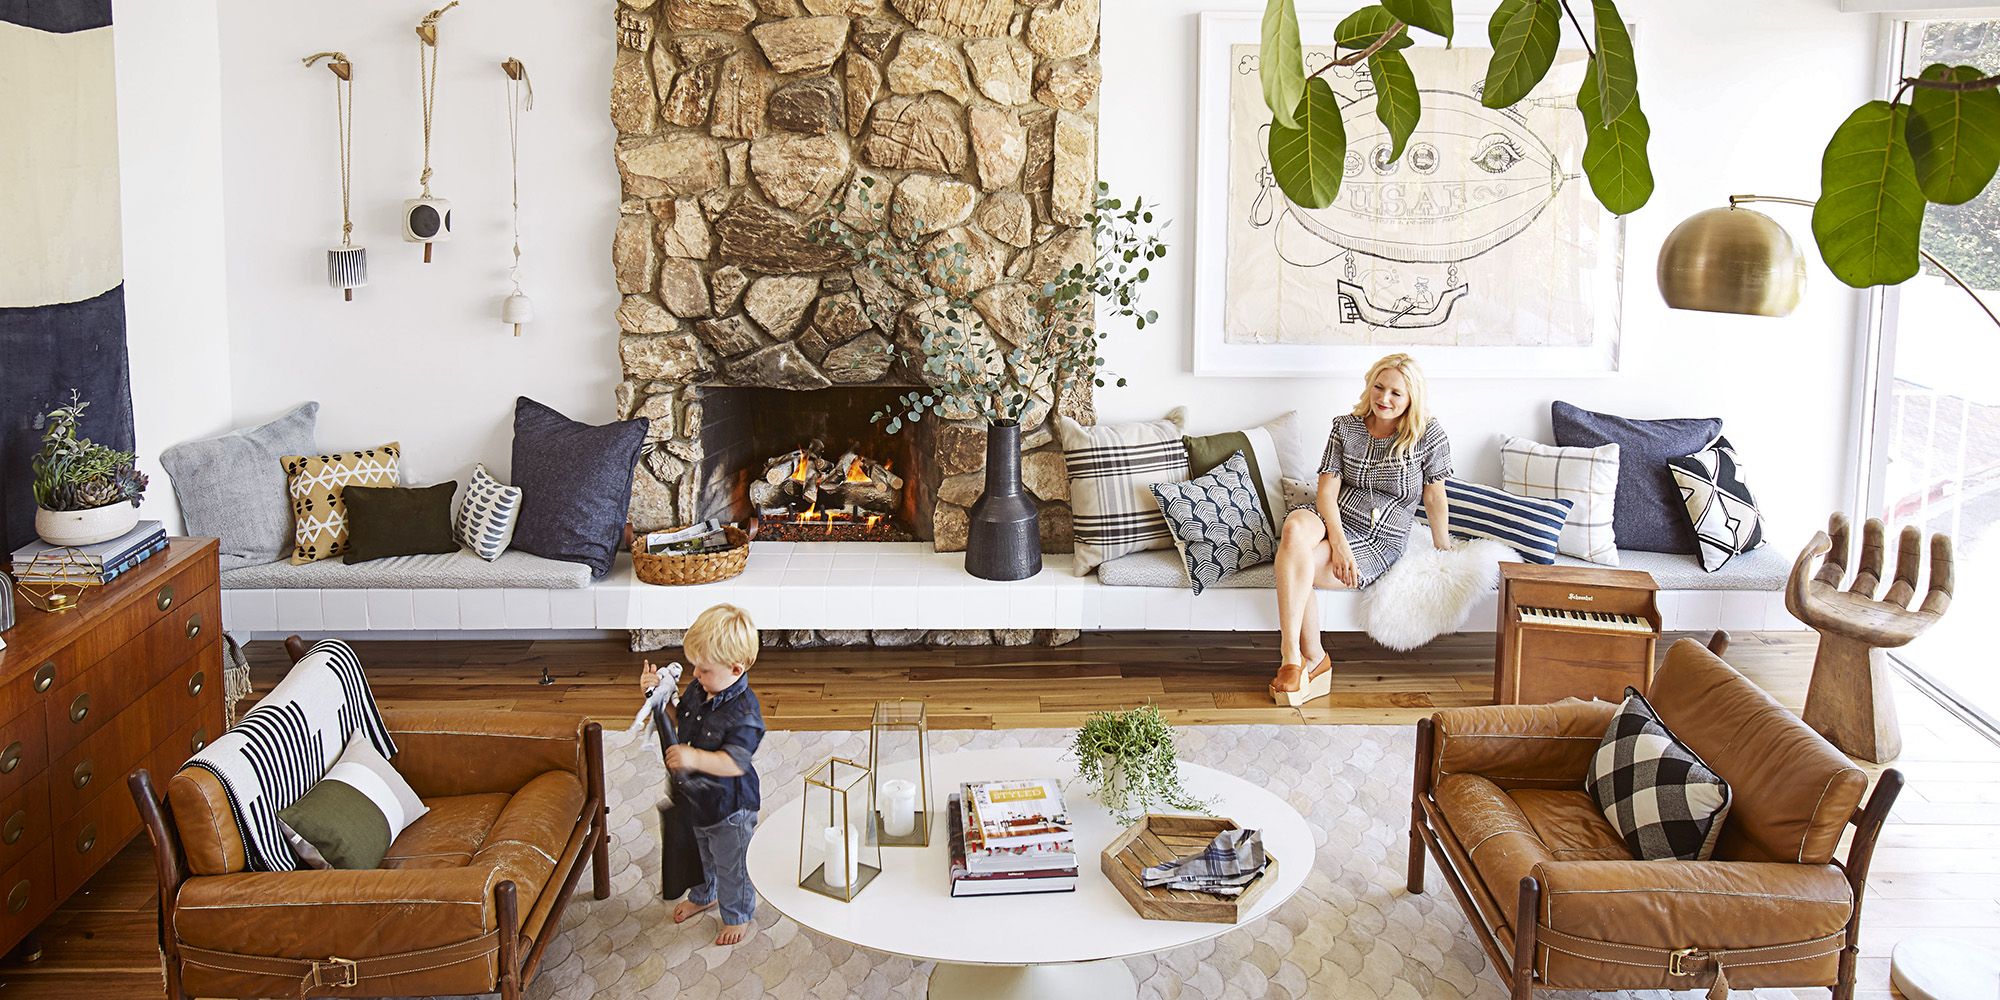 3 Decorating Tips From Emily Henderson